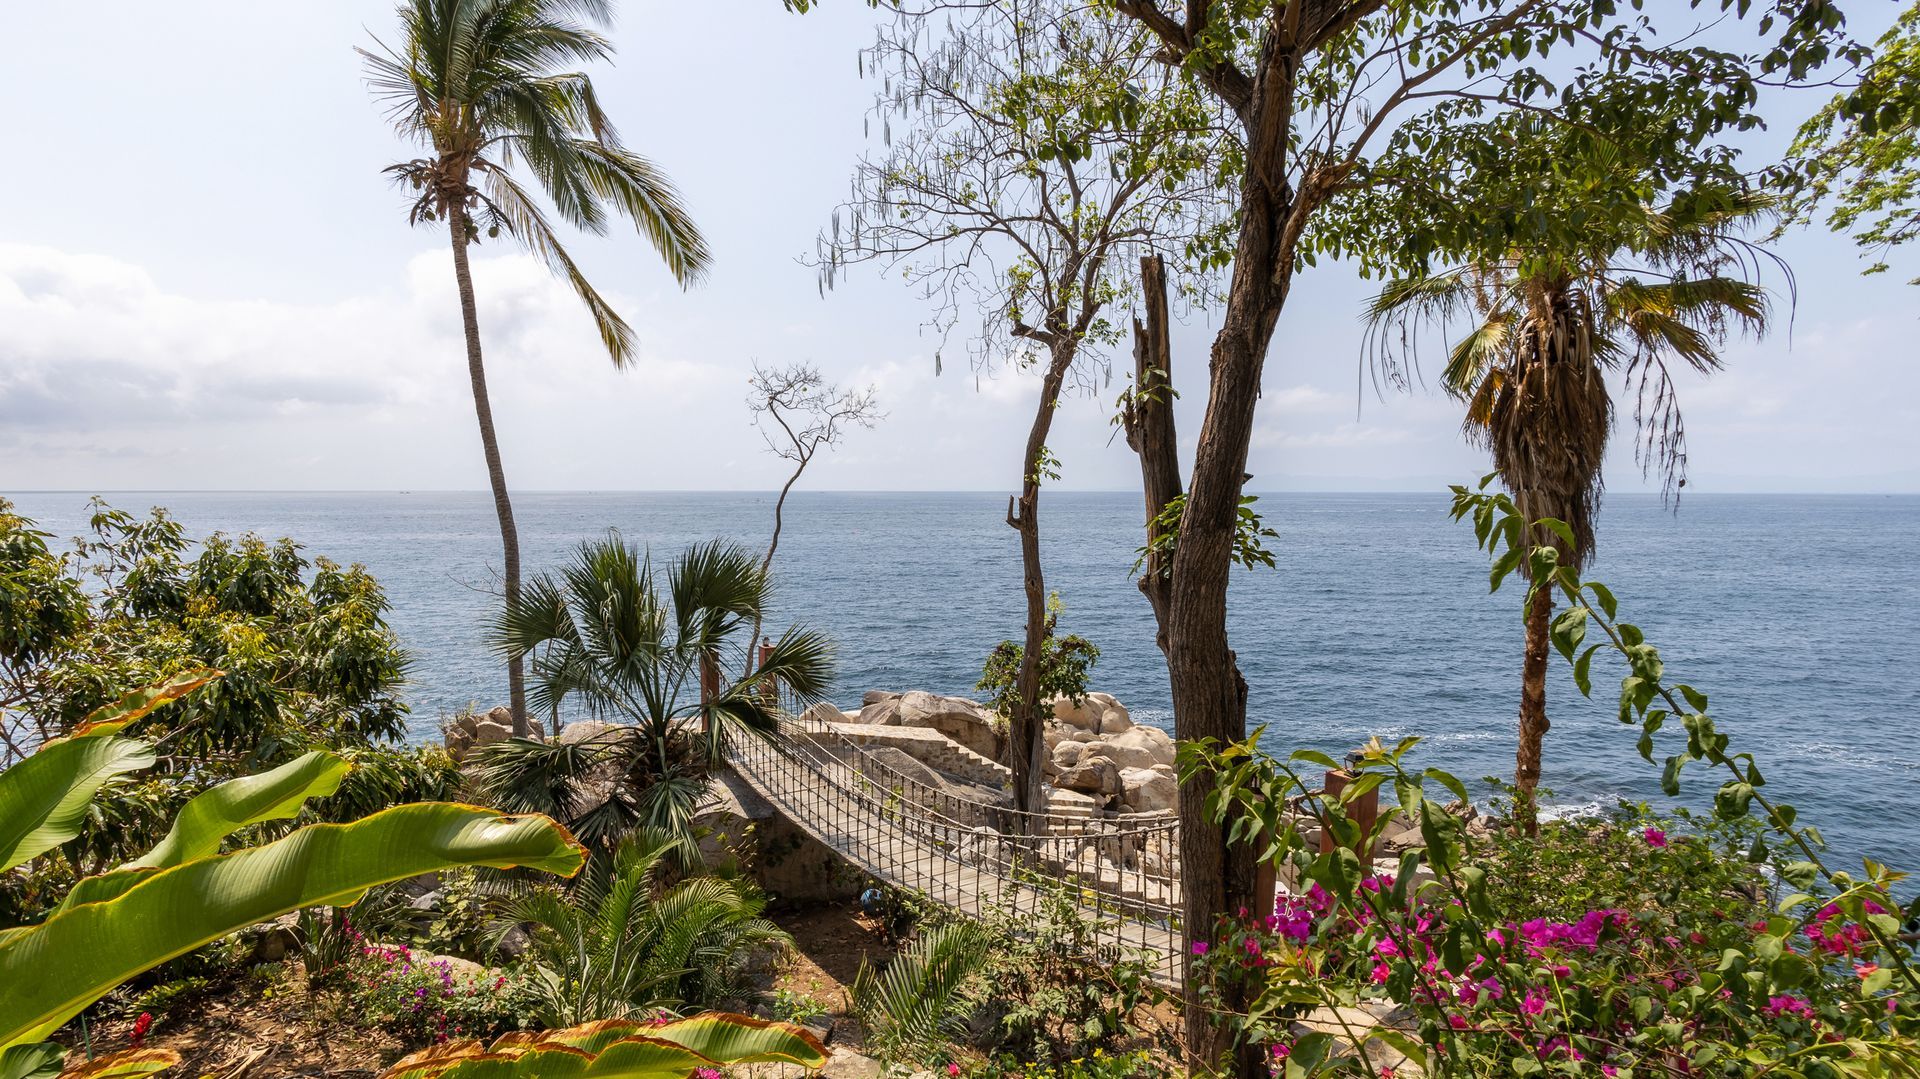 a view of the ocean from a cliff with palm trees and flowers